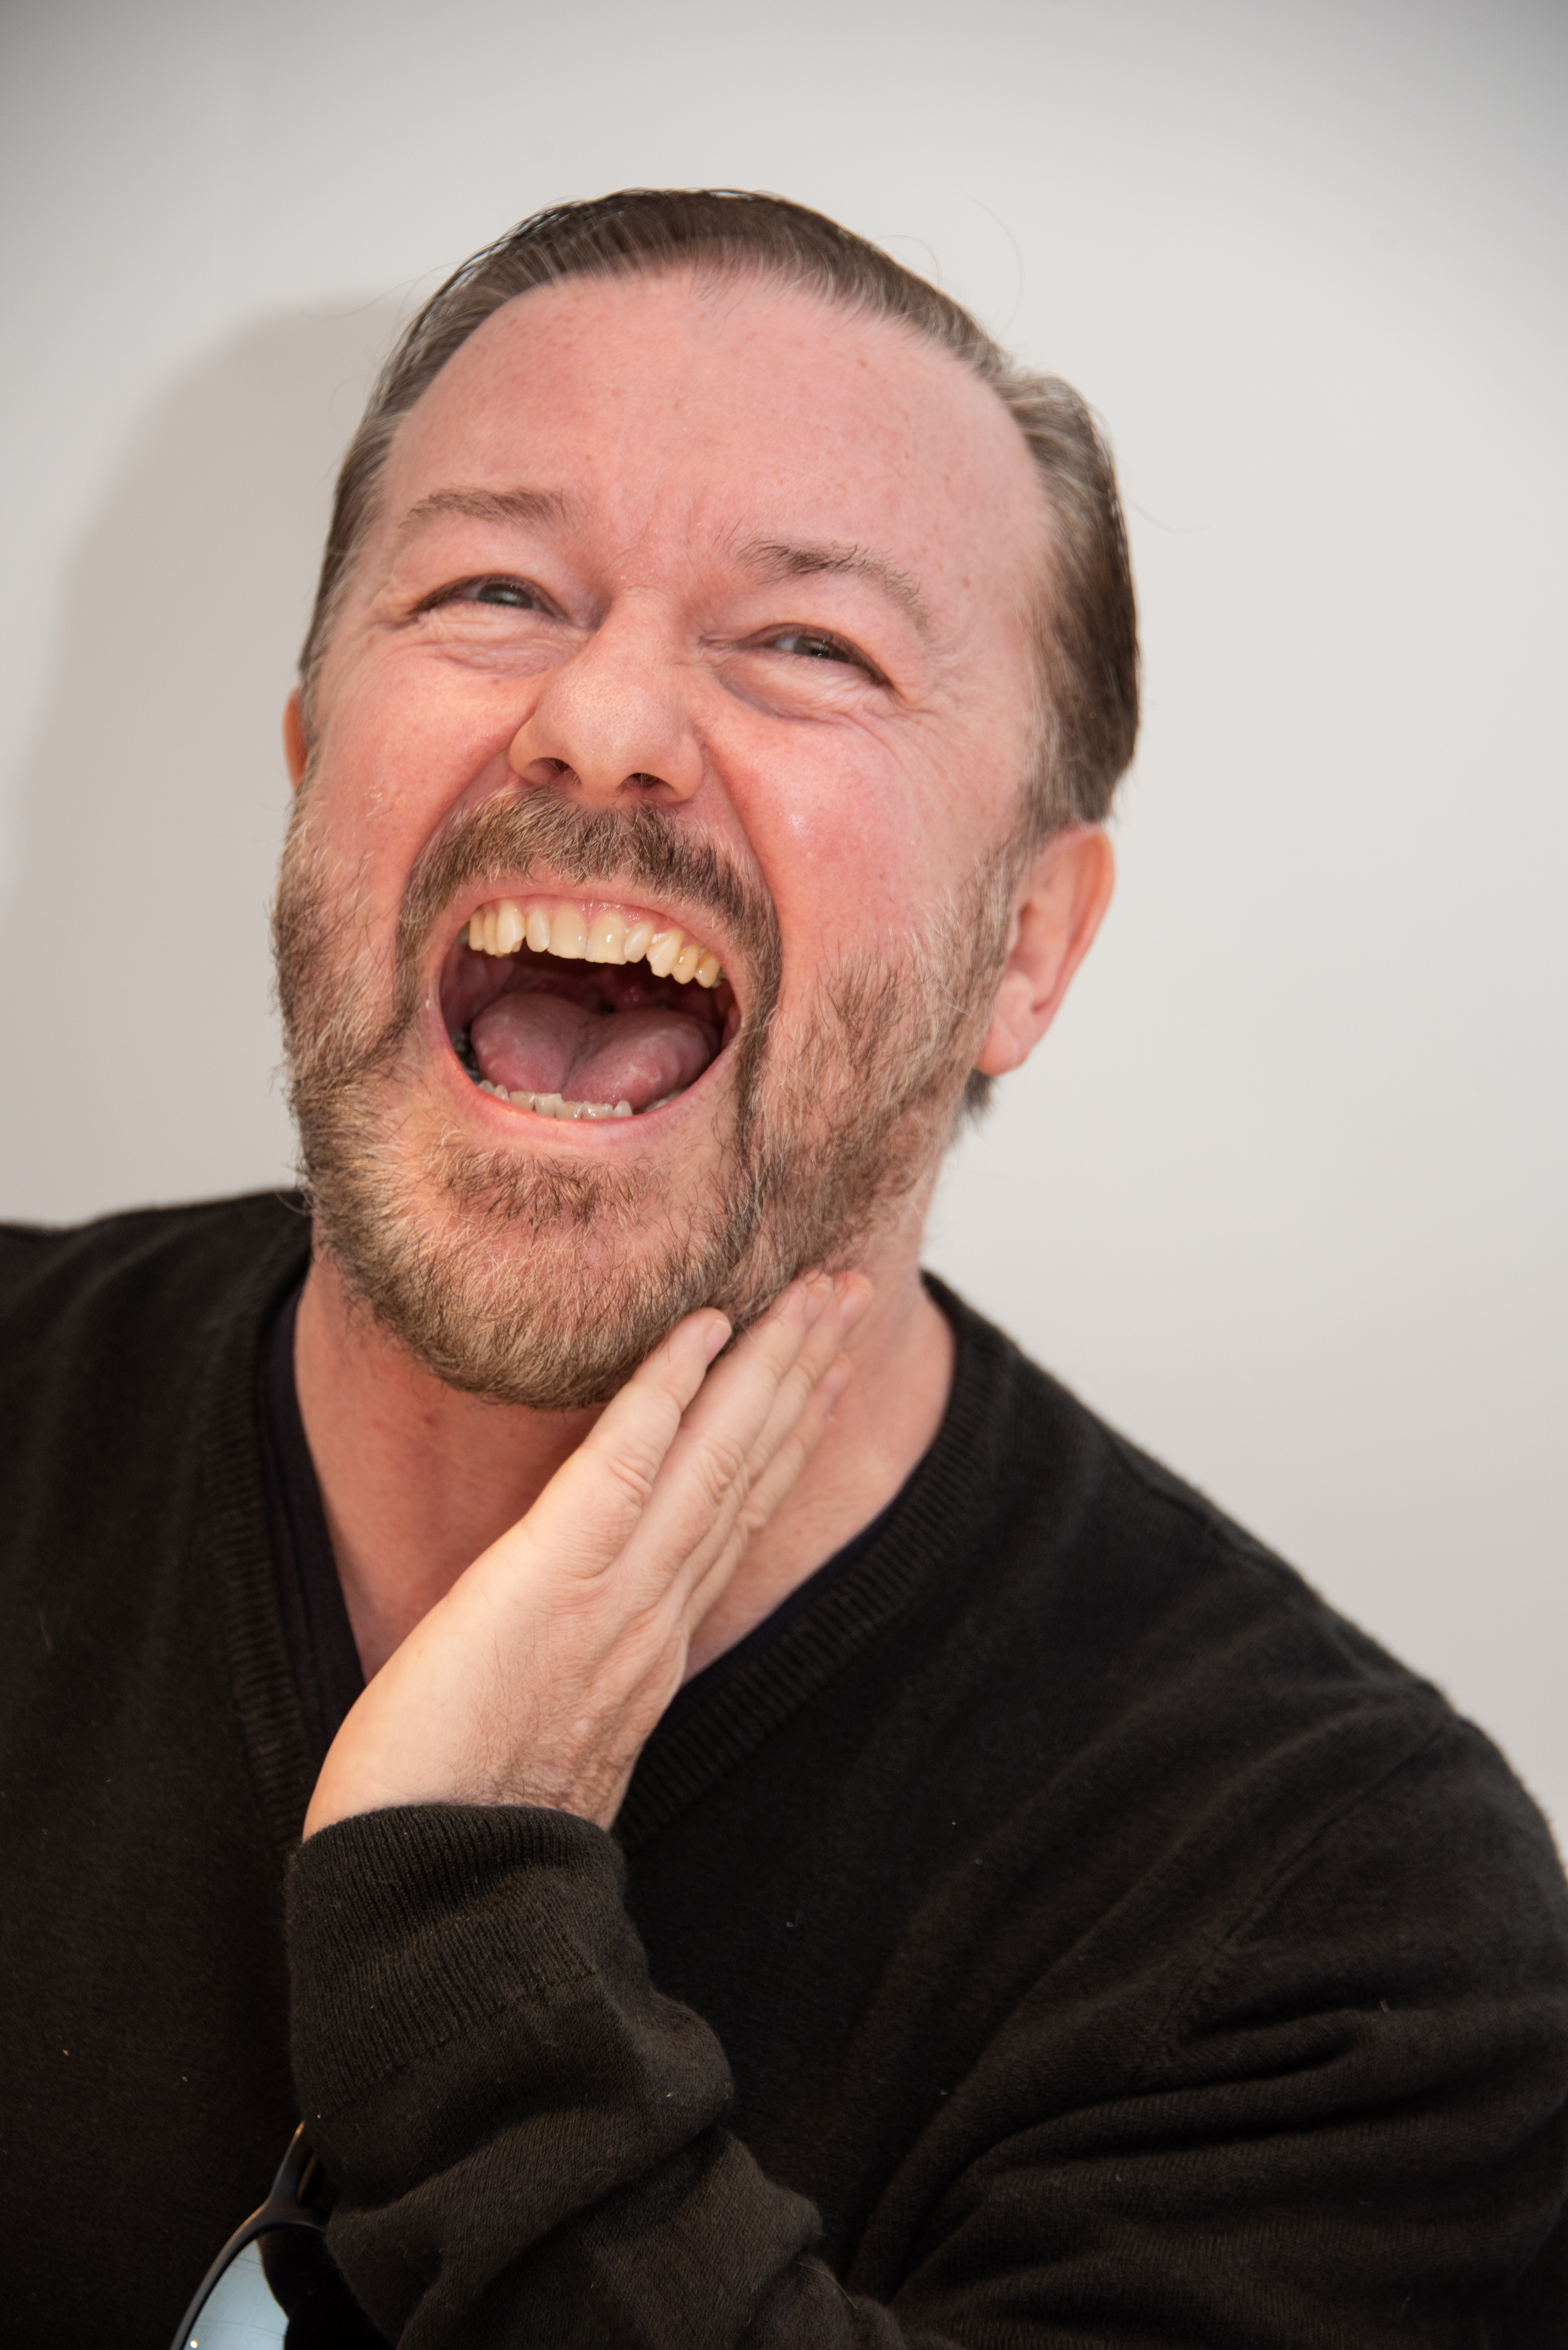 Ricky Gervais at the "After Life" Press Conference at The One Aldwych on March 1, 2020, in London, England. | Source: Getty Images